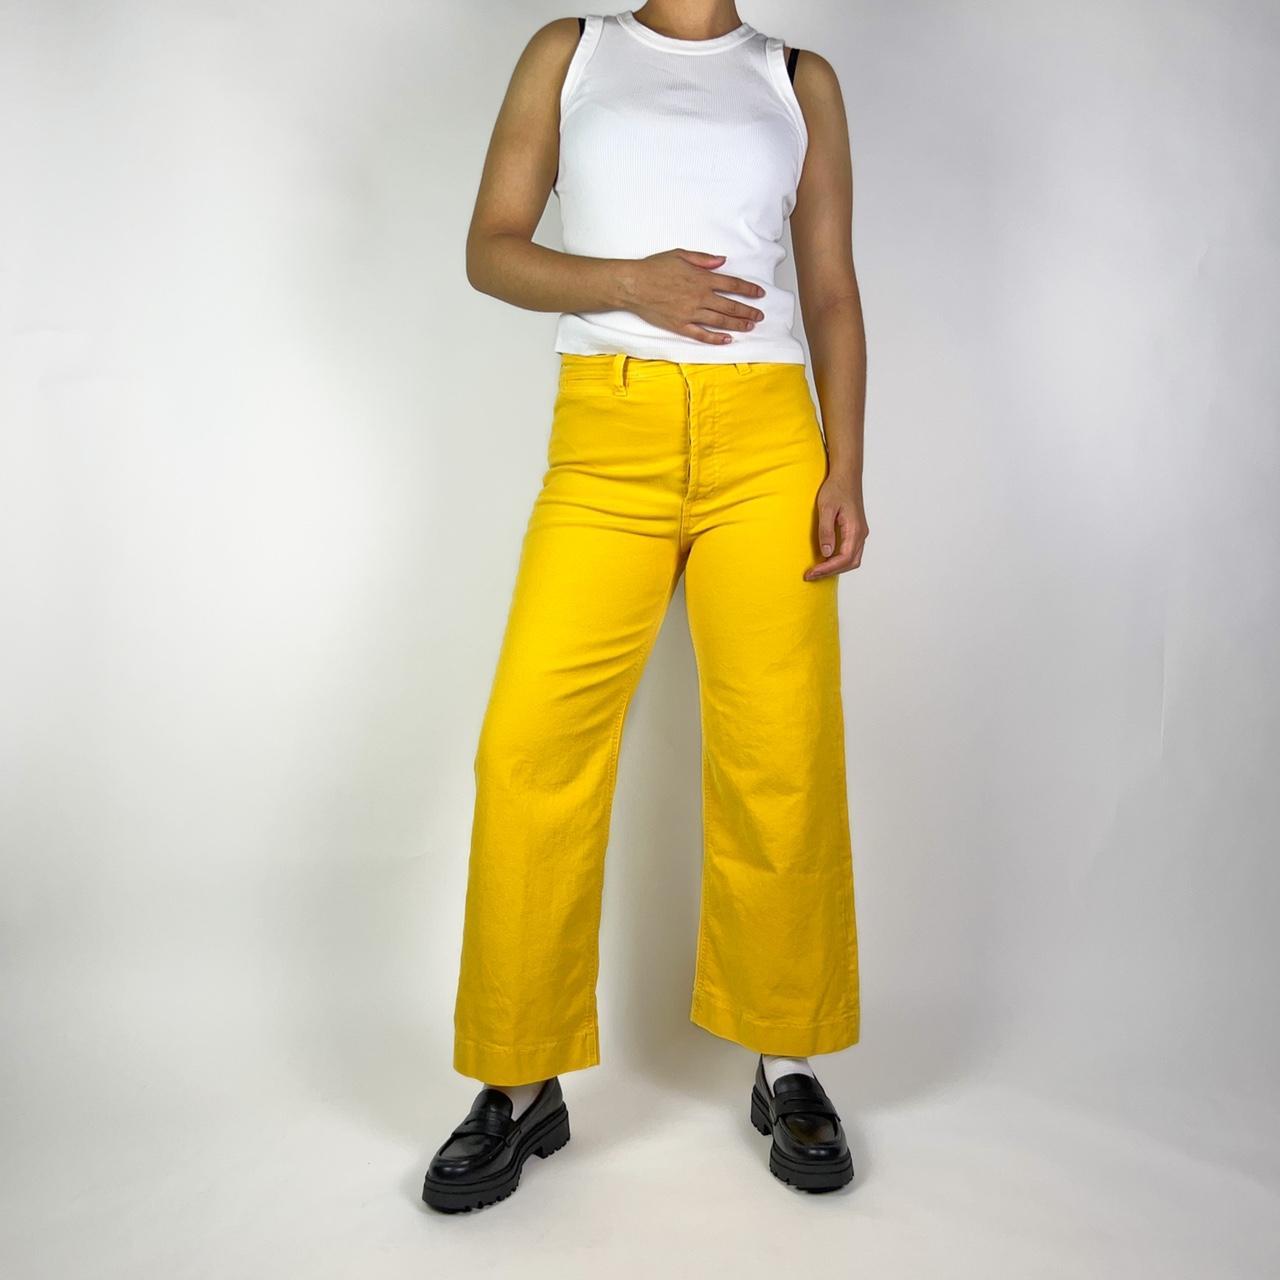 MiH Women's Yellow Jeans (2)